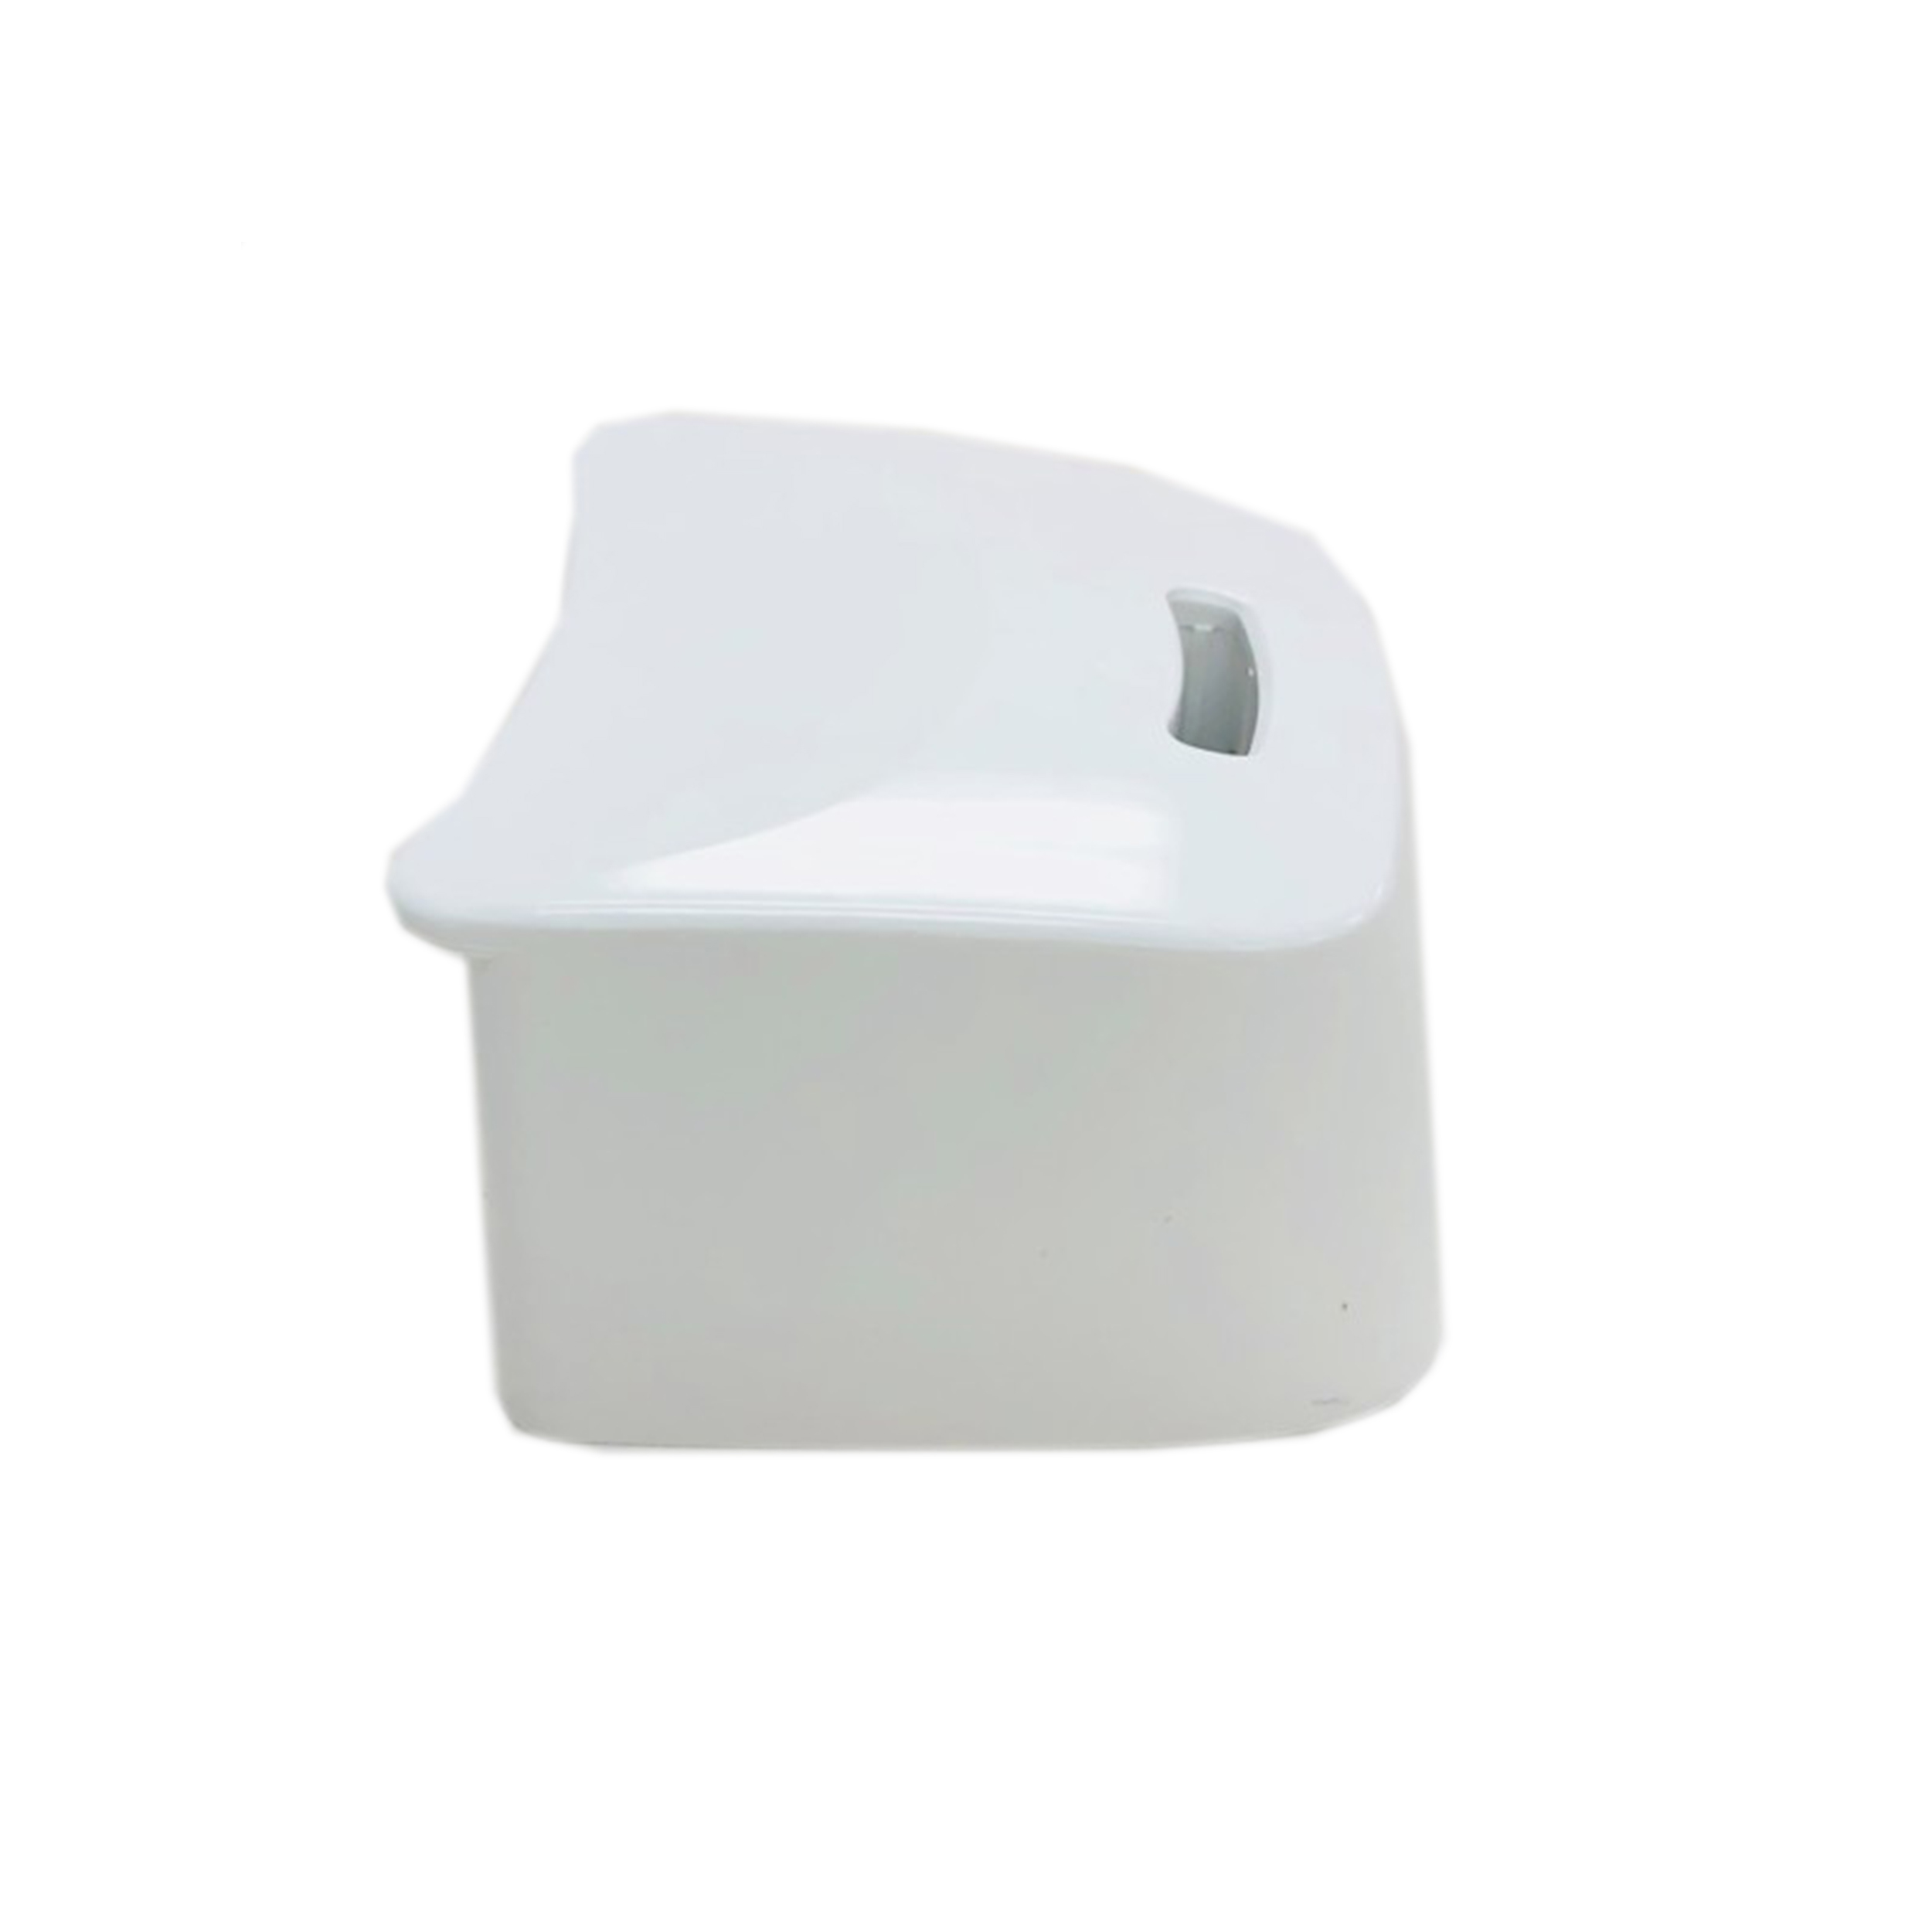 Standard Chinrest (High) (M0401441_COVER-ACCESSORIES CHIN BLOCK-HIGH/ABS/M0041658 PaX-i 3D Smart(CBCT))